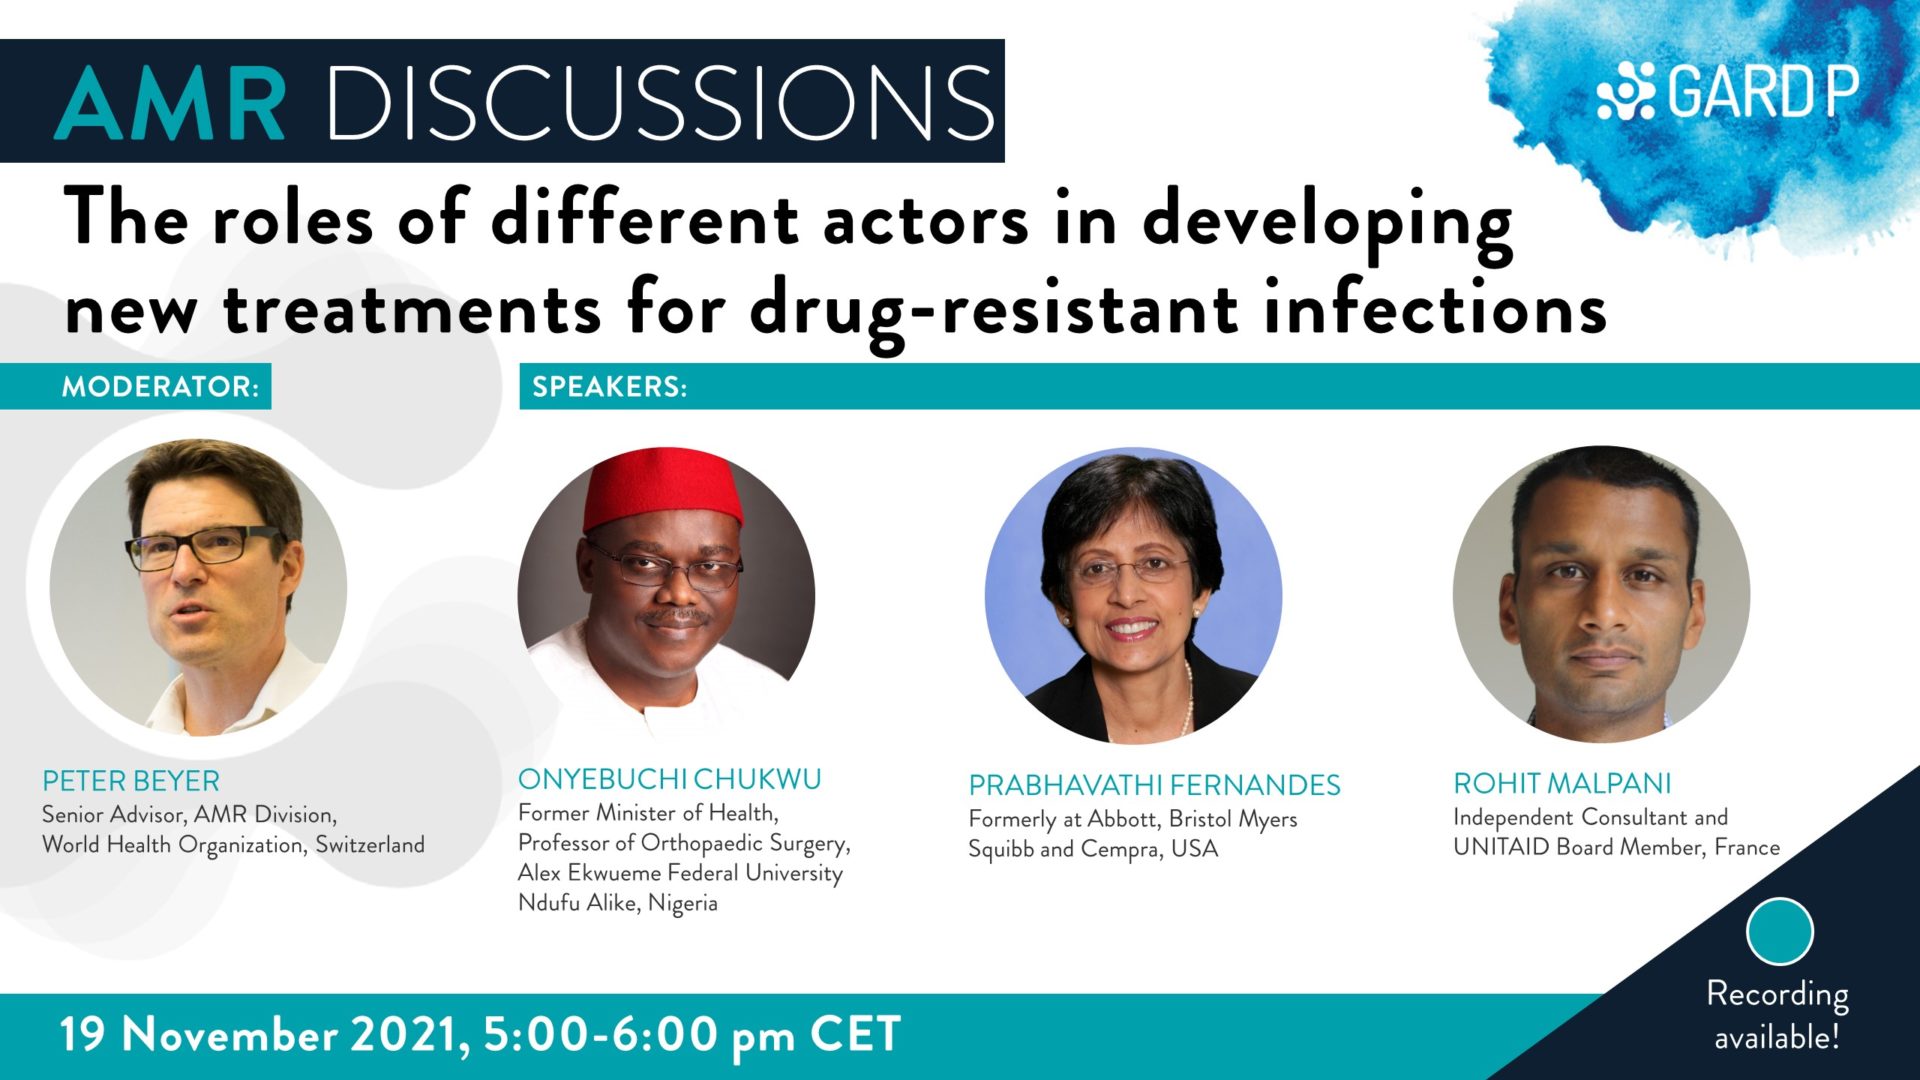 The roles of different actors in developing new treatments for drug-resistant infections